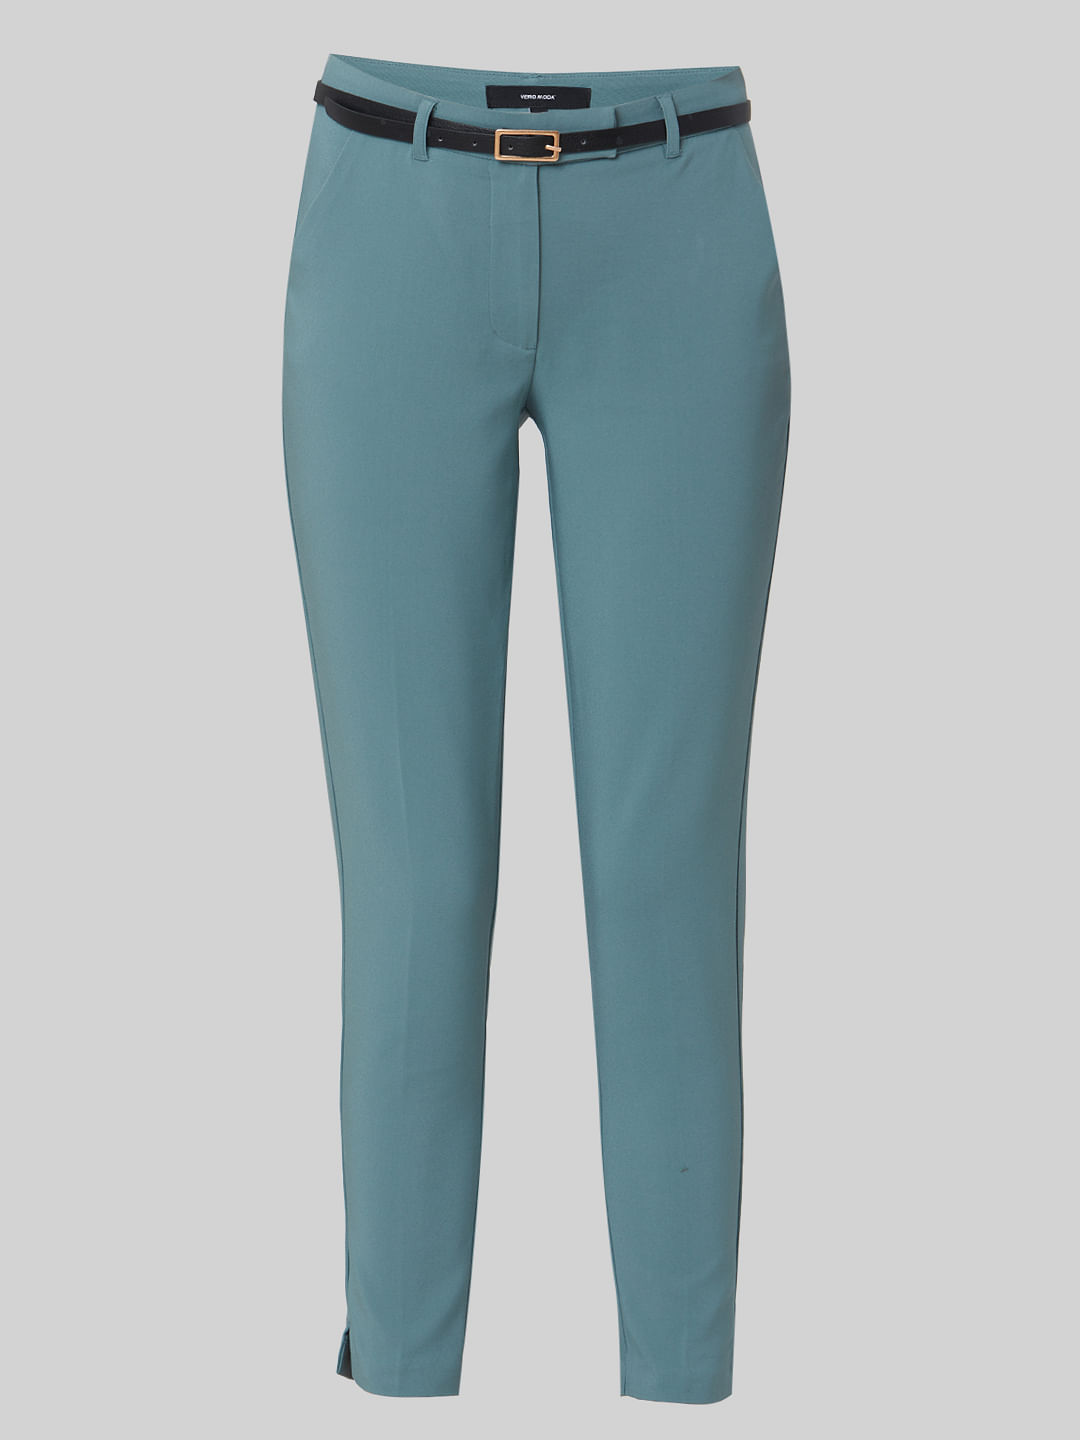 Trousers  Acne Studios Womens Pinstripe Tailored Trousers  Mid Blue Mid  Blue  Energy Forum Online